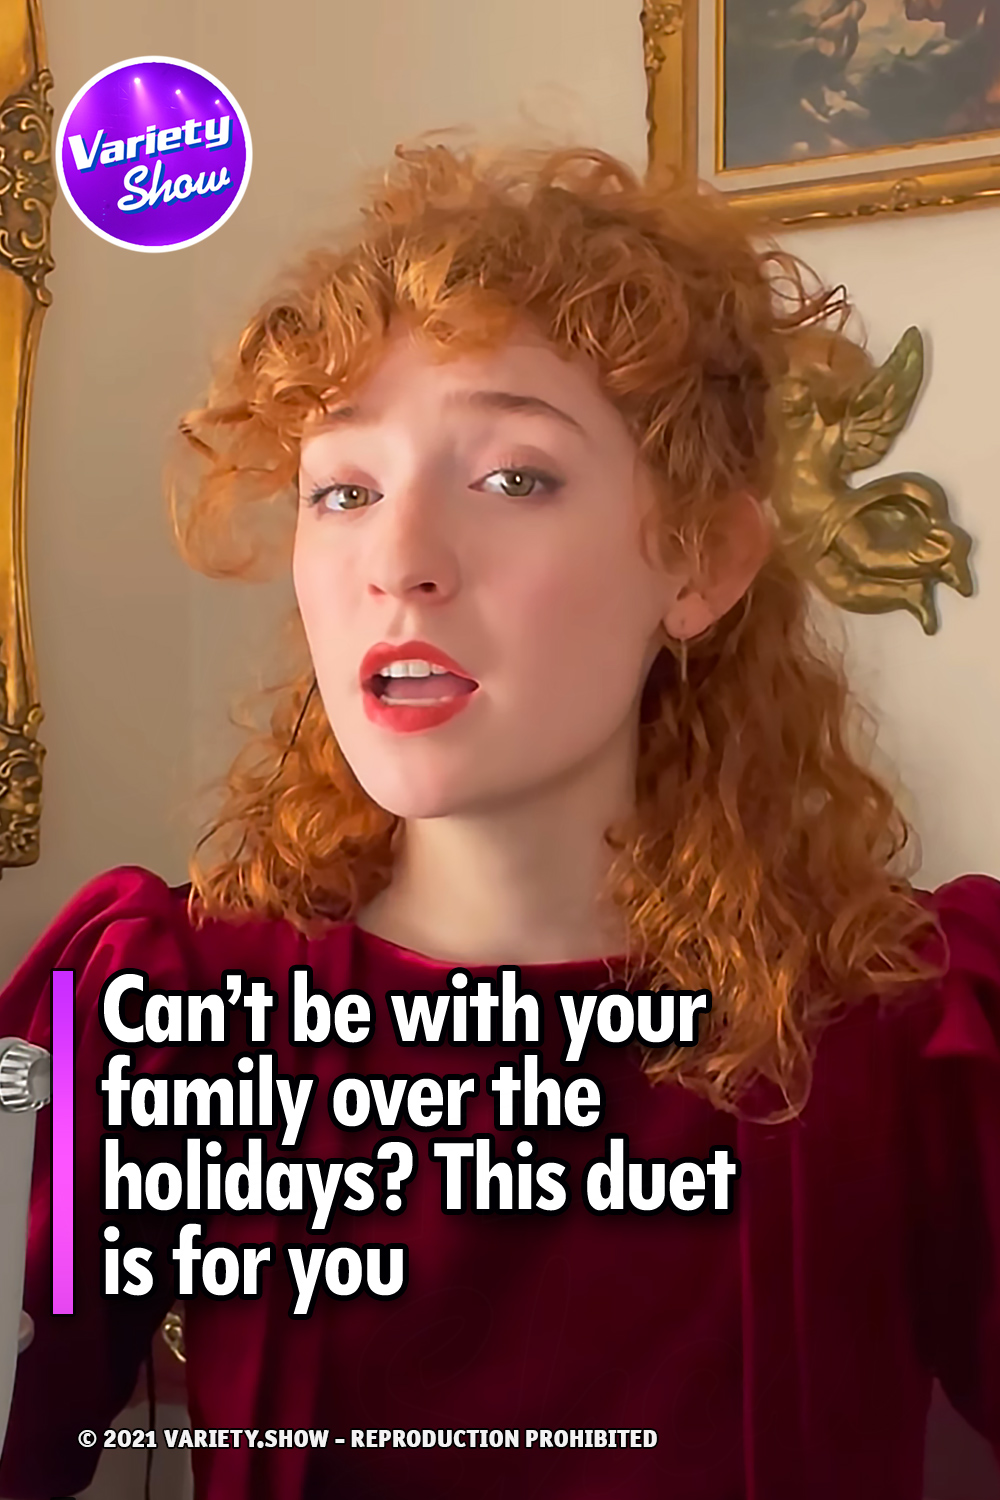 Can’t be with your family over the holidays? This duet is for you